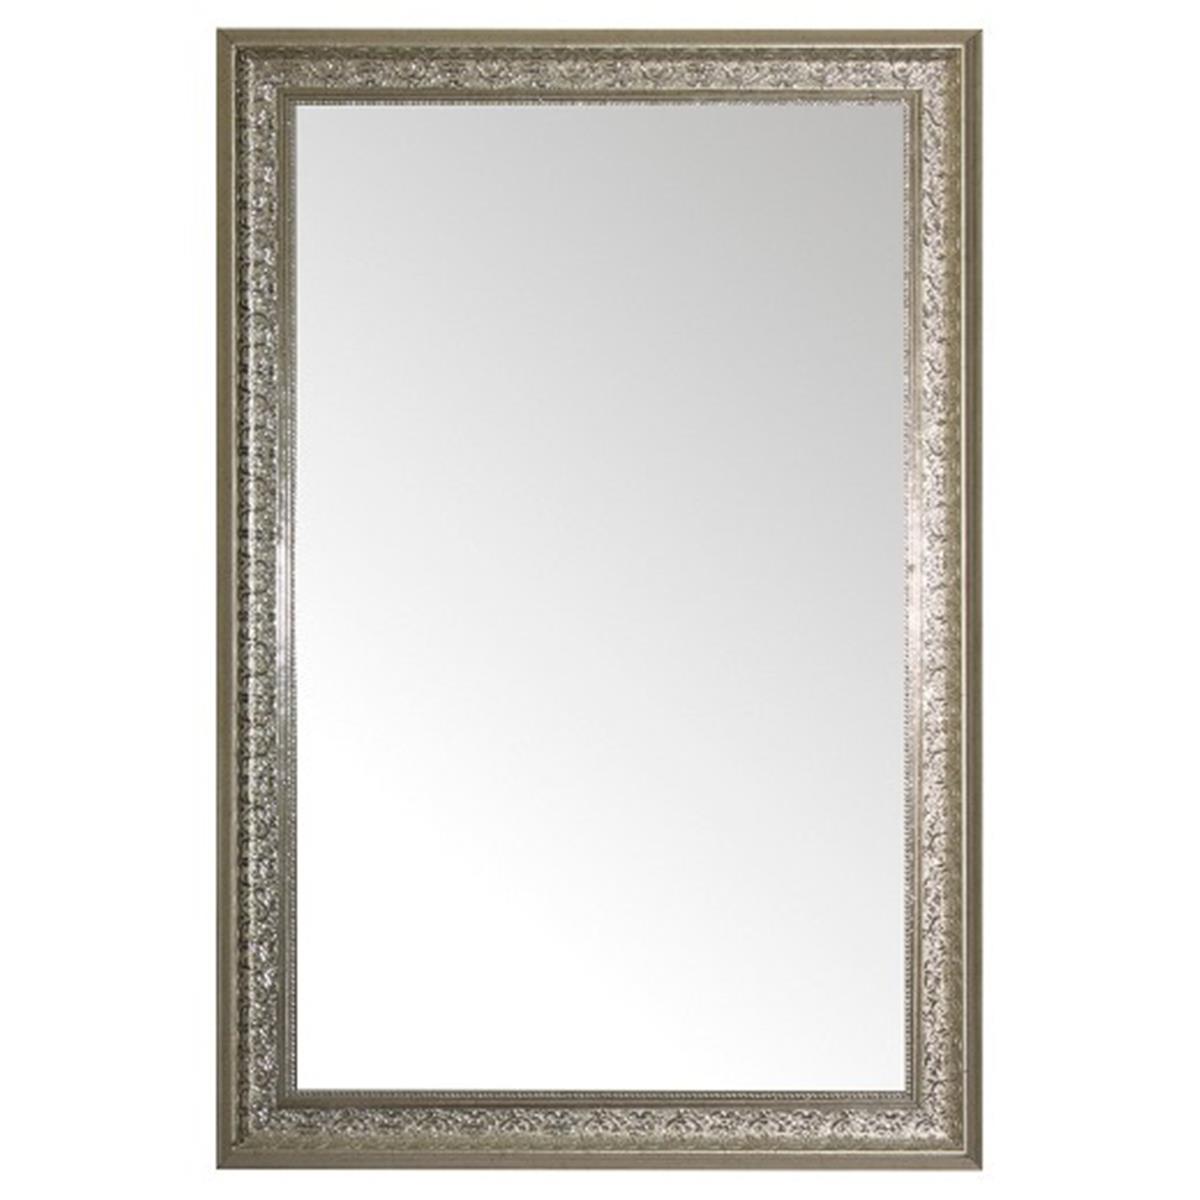 Mark V Series Champagne Beveled Wall Mirror, 24 X 36 In.